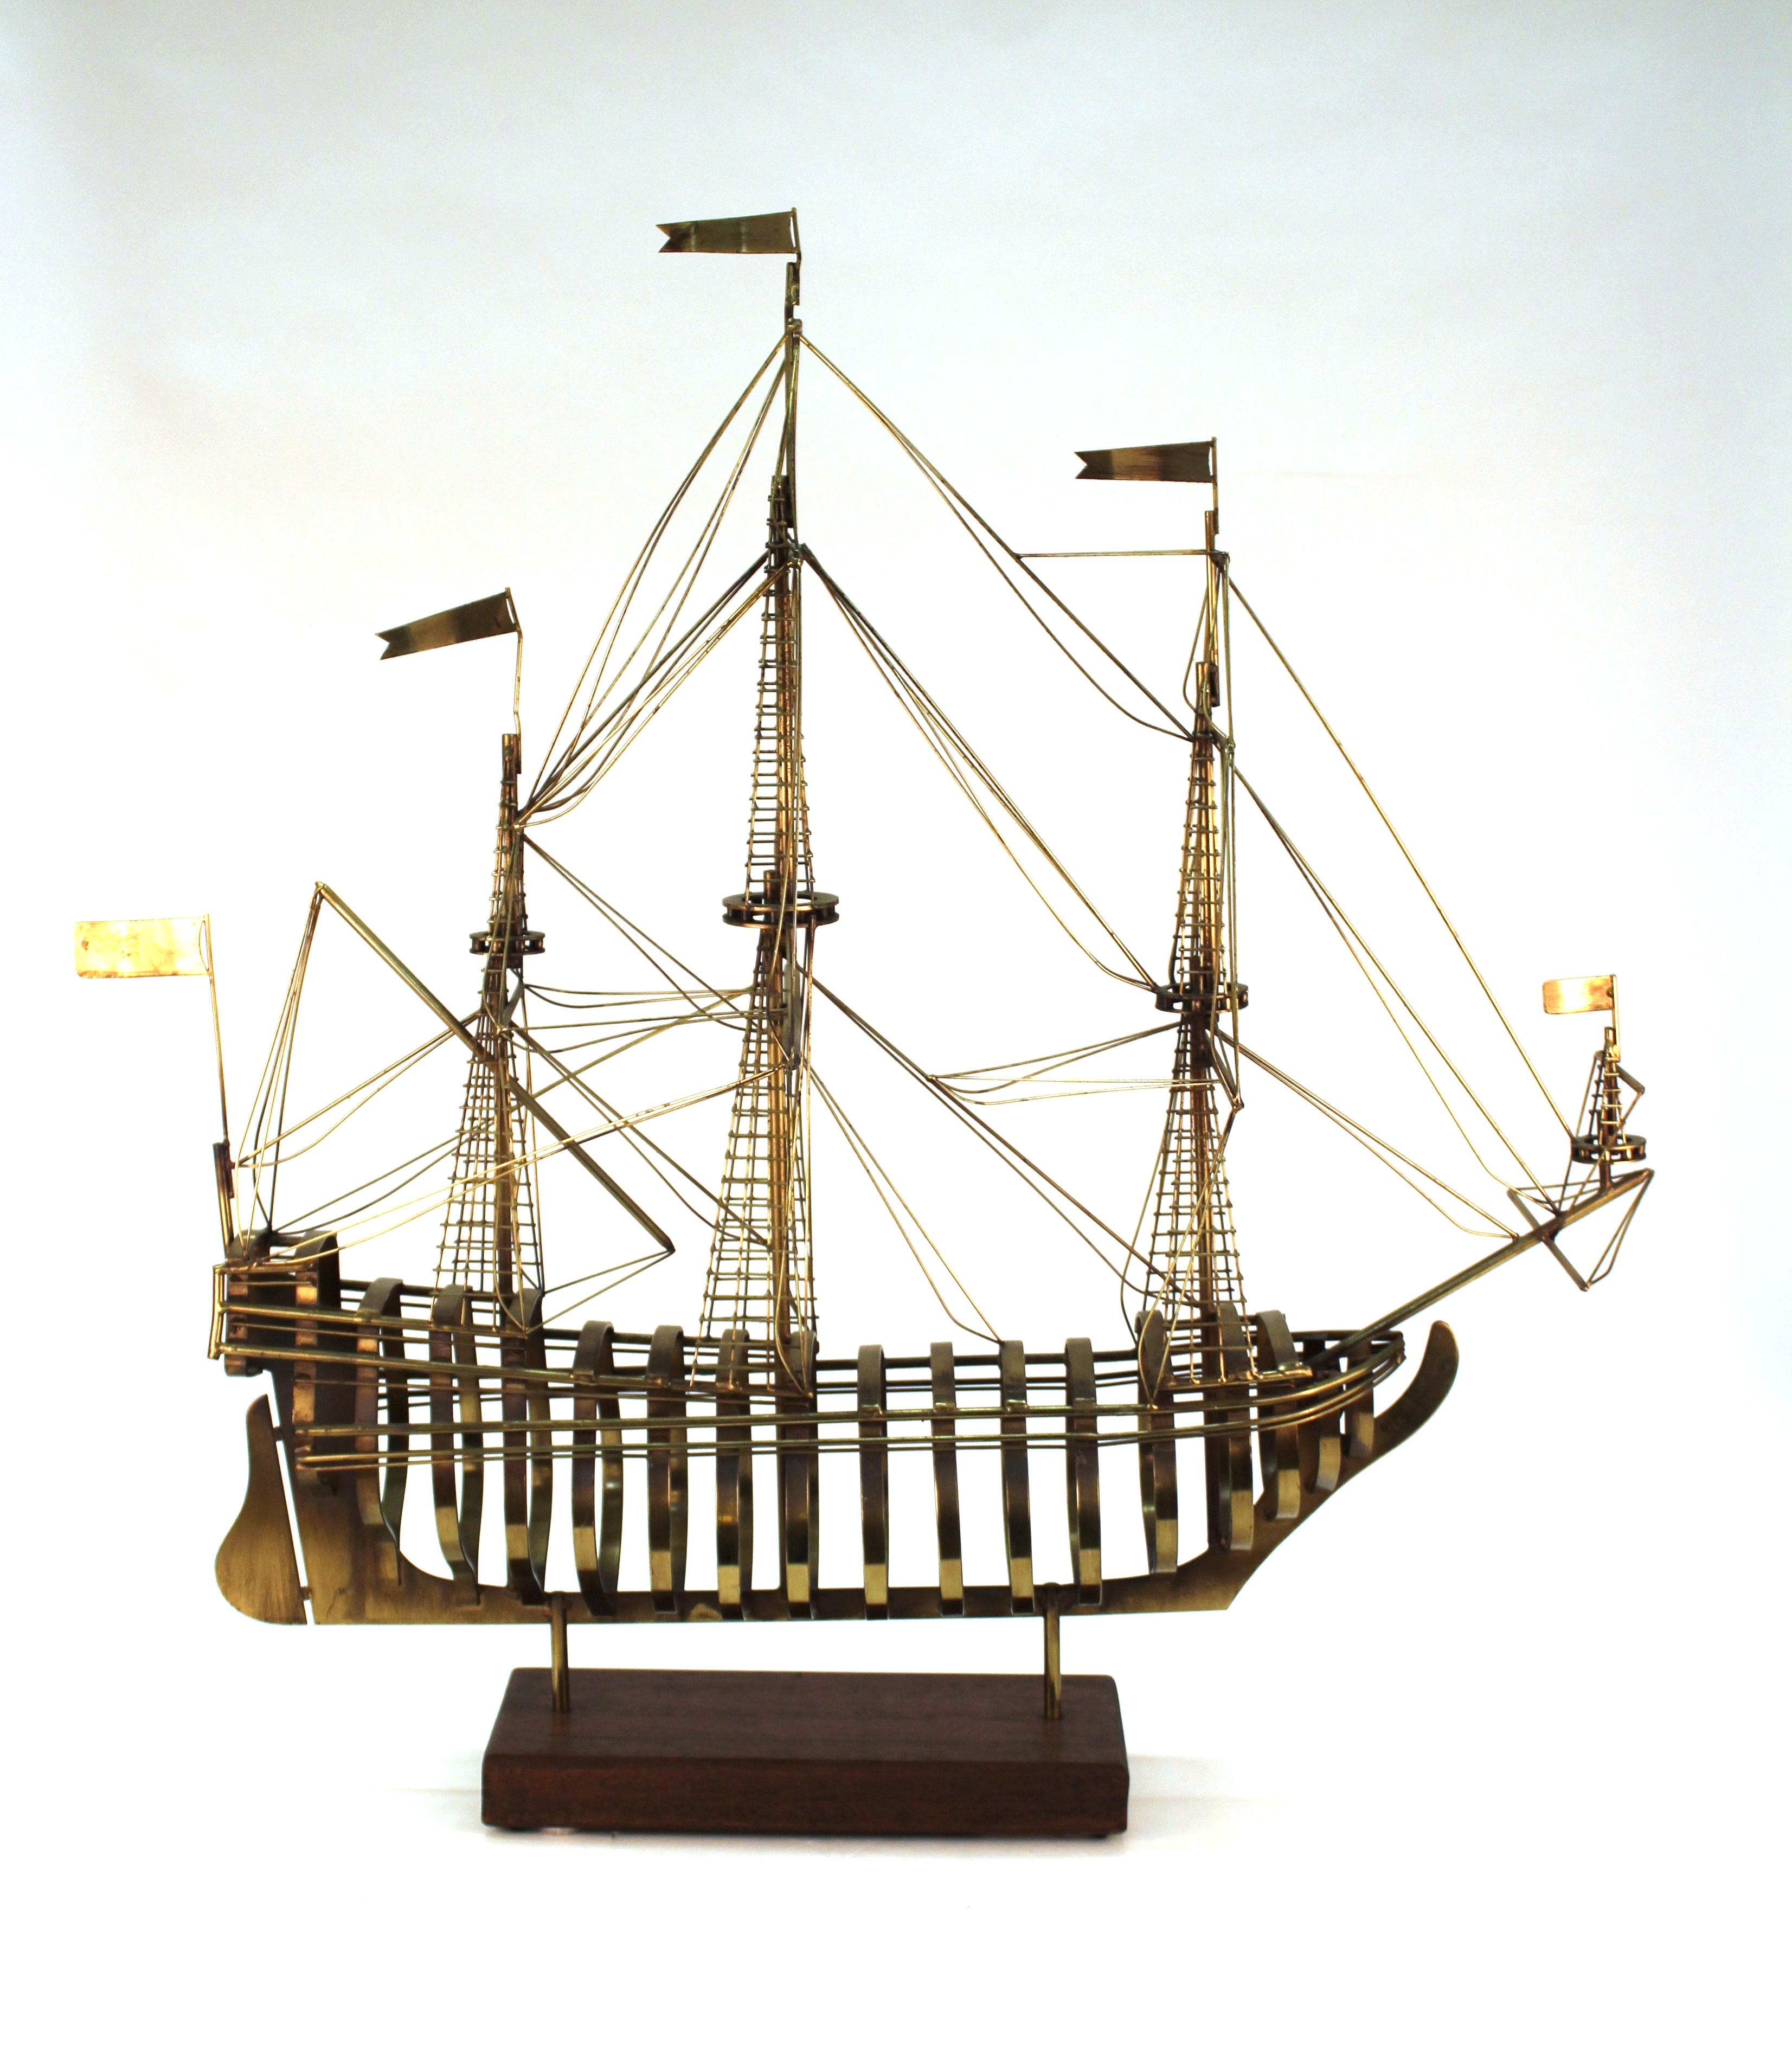 Modern style brass sculpture of a ship model atop a wooden base, made by Curtis Jere, signed and dated 1980 on the back. The piece is highly detailed and is in great vintage condition, with some age-appropriate wear to the patina of the brass.